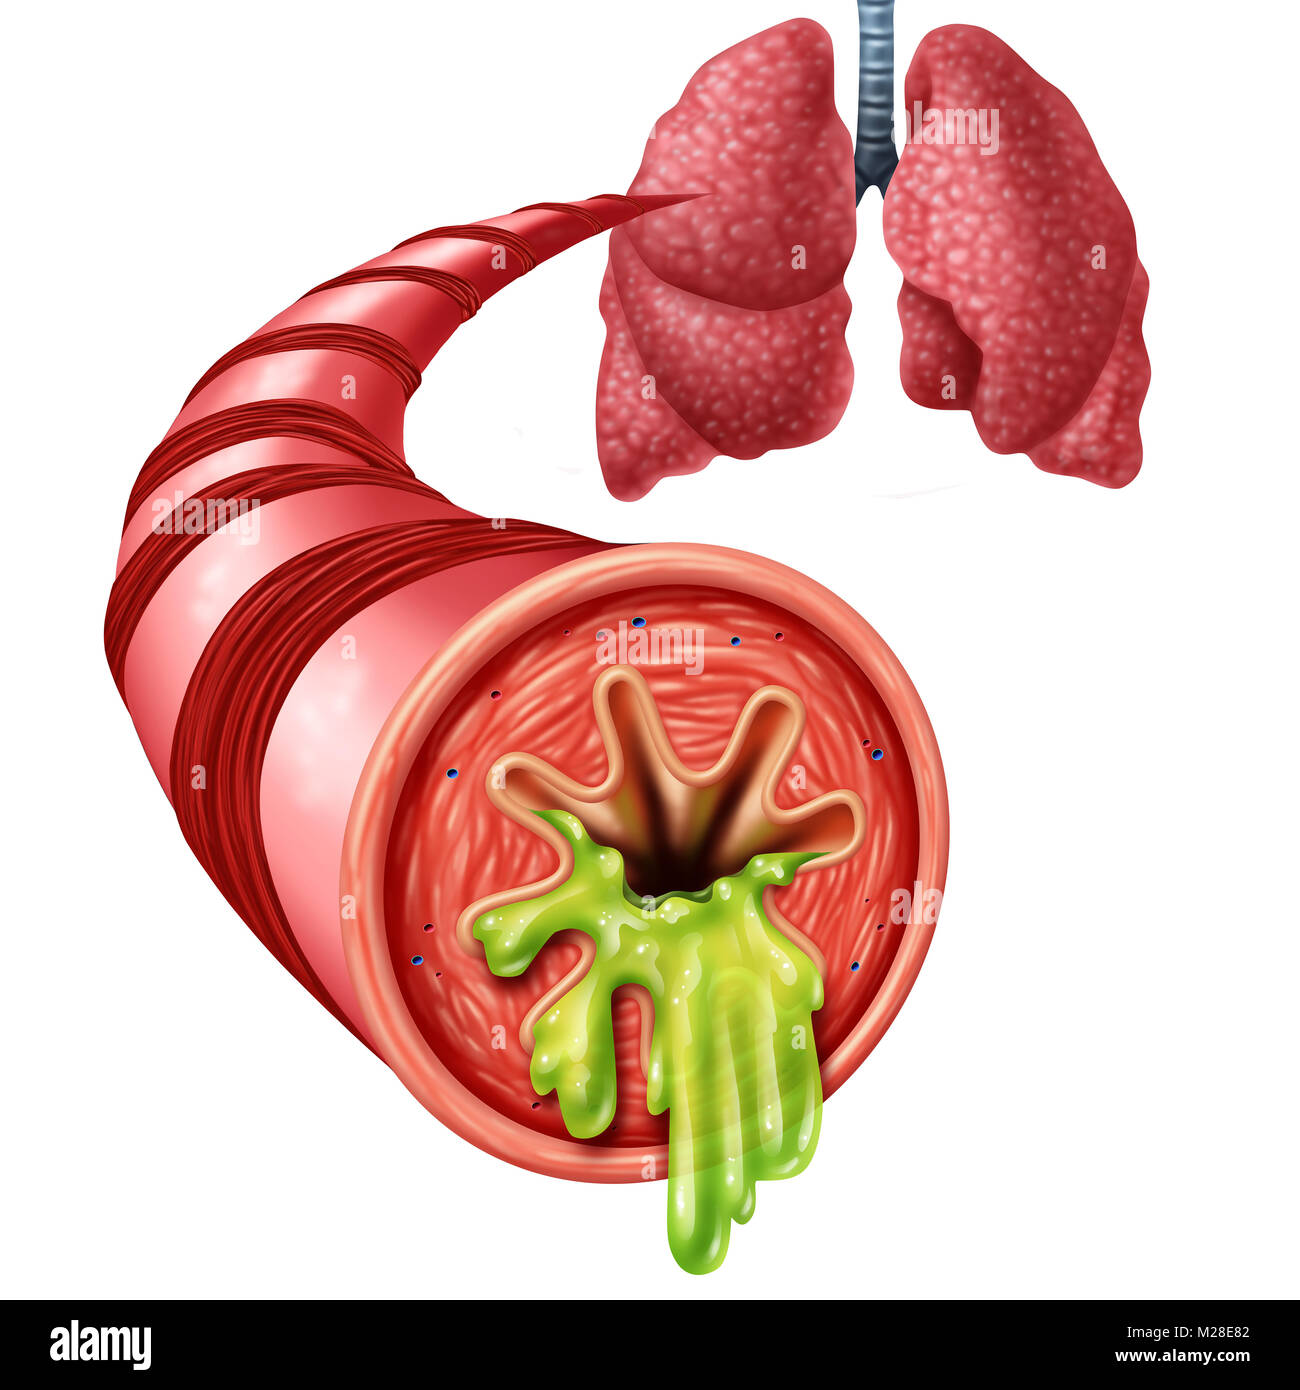 Bronchitis anatomy concept as an inflammation of bronchial tube lining with thick mucus secreted as a chest cold as a 3D illustration elements. Stock Photo